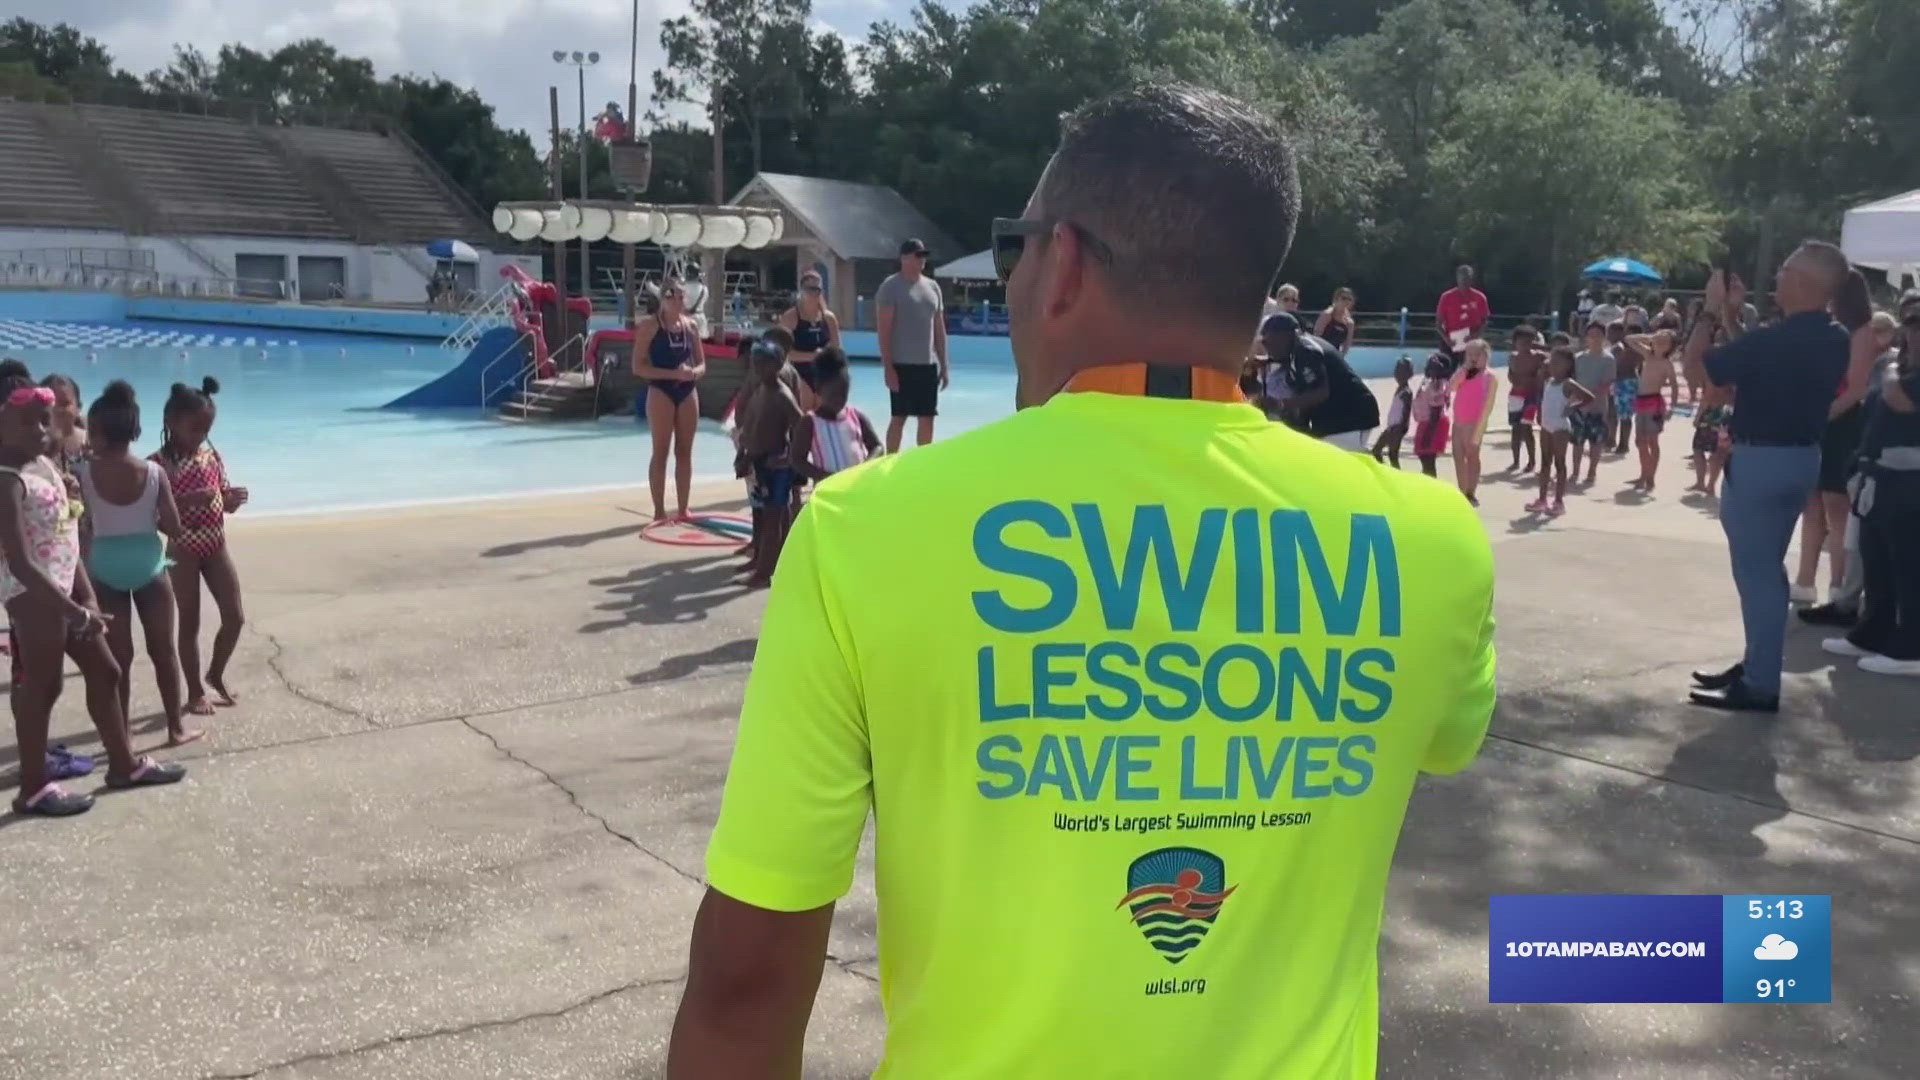 The global anti-drowning initiative aims to teach children how to swim.